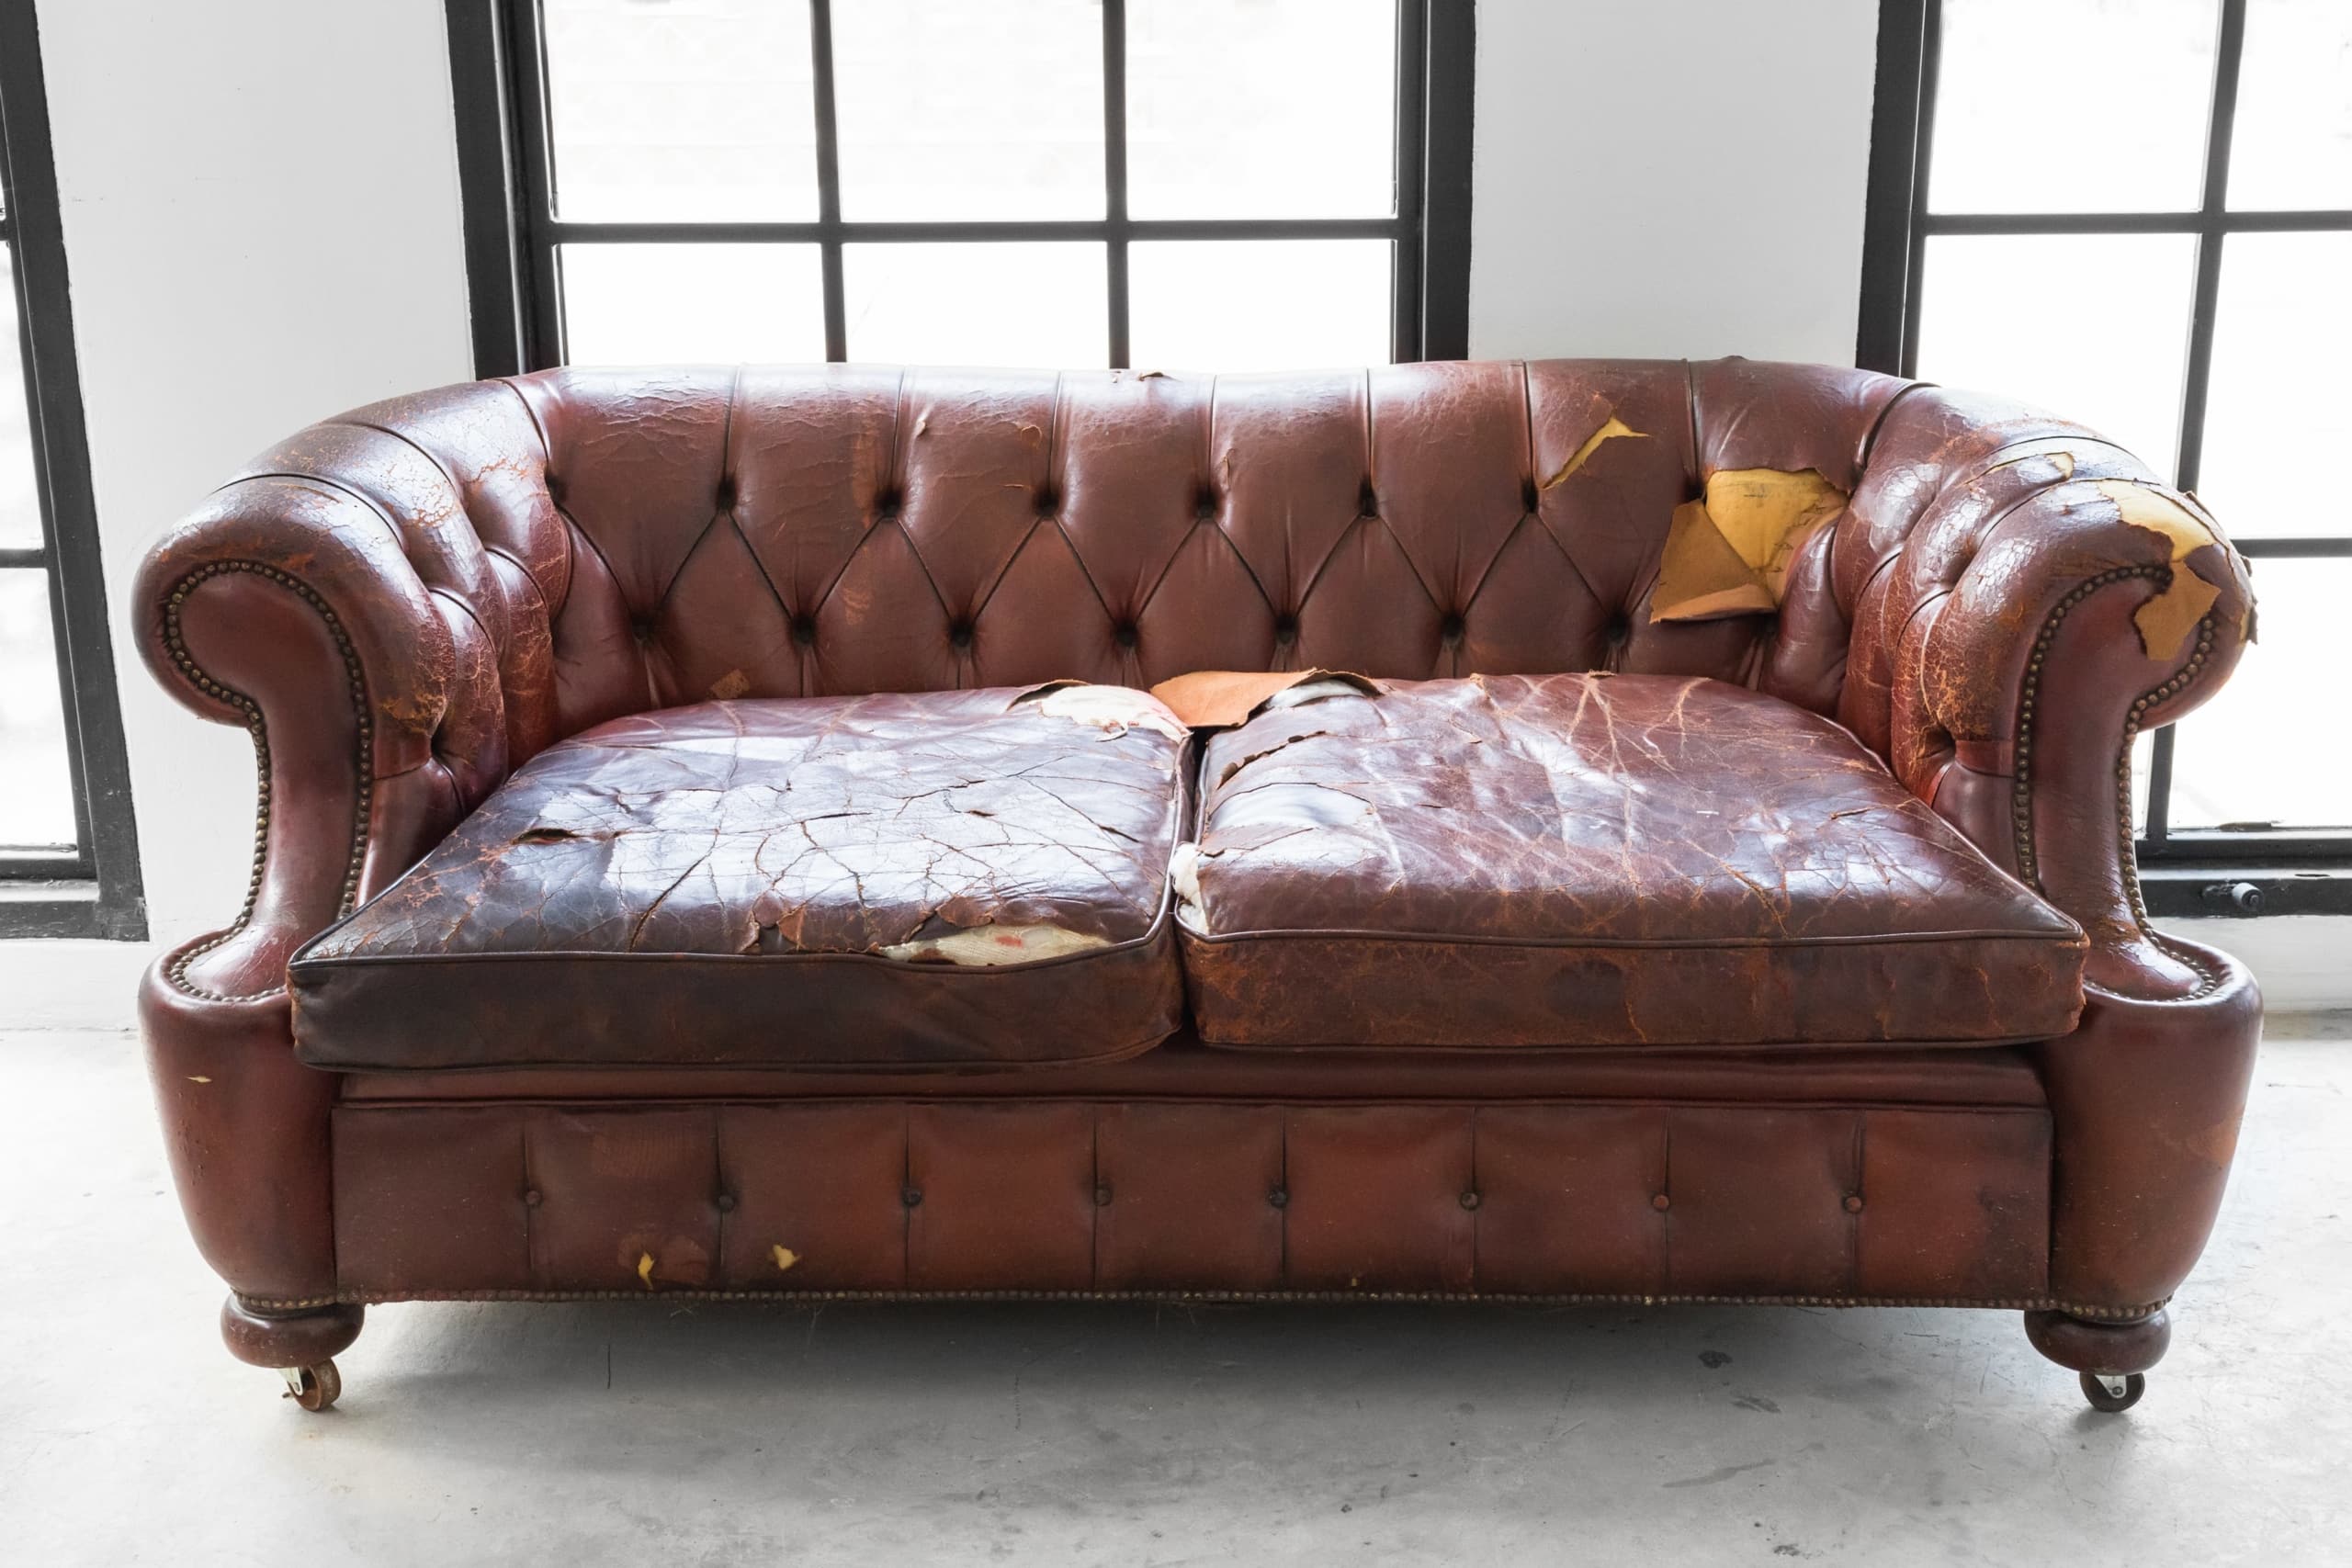 old-leather-couch